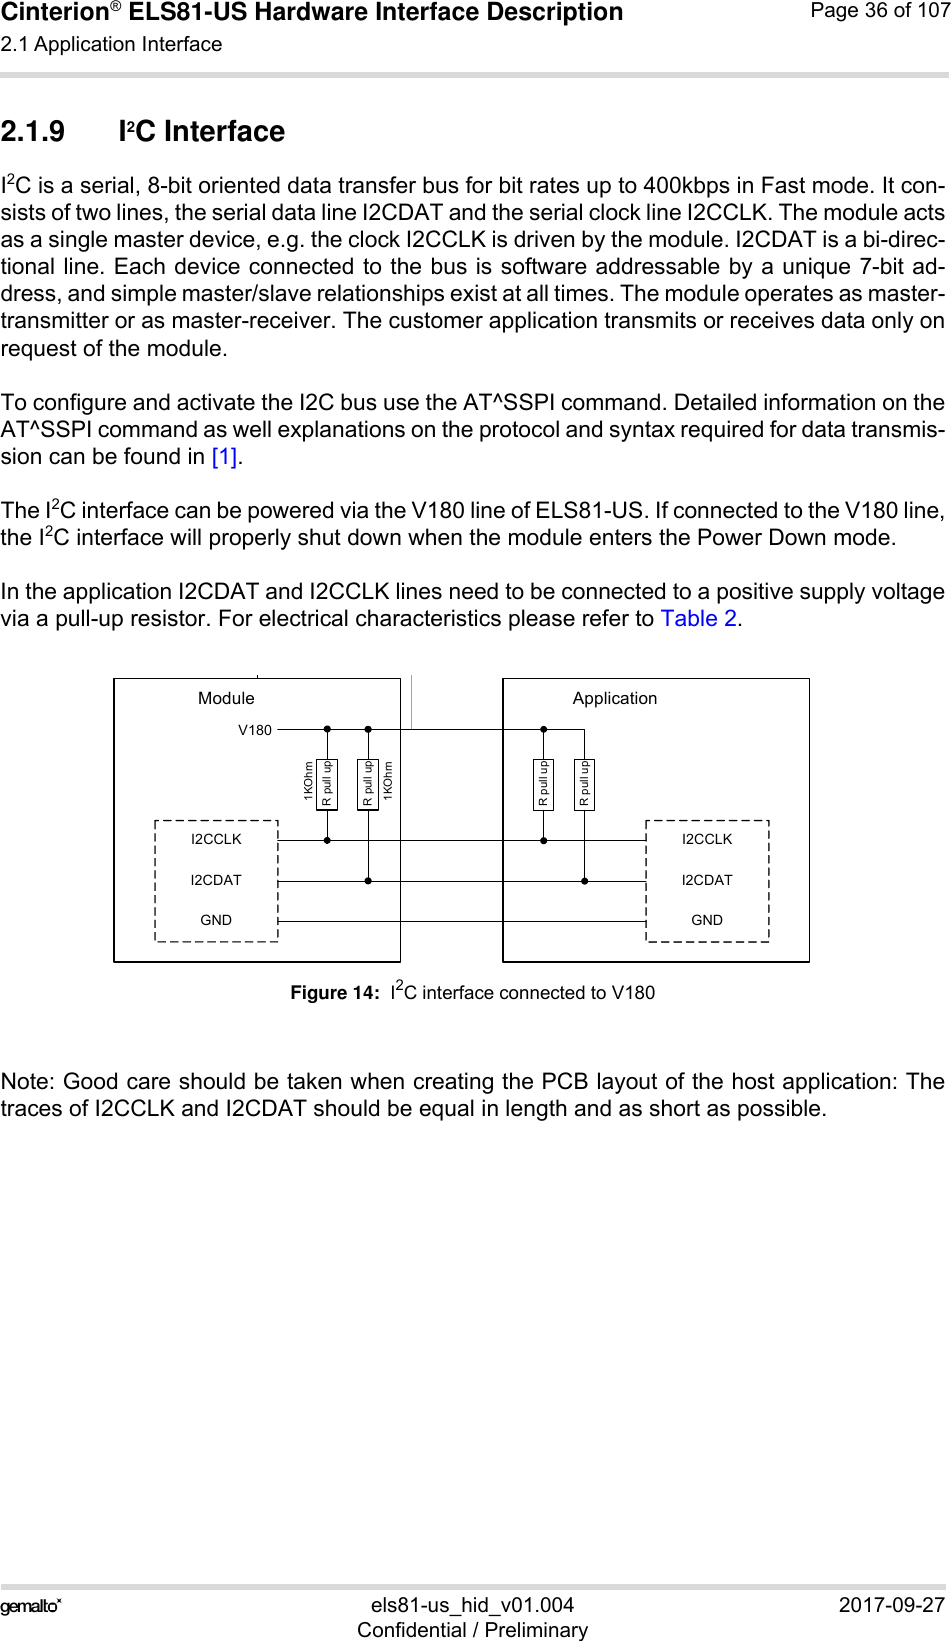 Cinterion® ELS81-US Hardware Interface Description2.1 Application Interface53els81-us_hid_v01.004 2017-09-27Confidential / PreliminaryPage 36 of 1072.1.9 I2C InterfaceI2C is a serial, 8-bit oriented data transfer bus for bit rates up to 400kbps in Fast mode. It con-sists of two lines, the serial data line I2CDAT and the serial clock line I2CCLK. The module actsas a single master device, e.g. the clock I2CCLK is driven by the module. I2CDAT is a bi-direc-tional line. Each device connected to the bus is software addressable by a unique 7-bit ad-dress, and simple master/slave relationships exist at all times. The module operates as master-transmitter or as master-receiver. The customer application transmits or receives data only onrequest of the module.To configure and activate the I2C bus use the AT^SSPI command. Detailed information on theAT^SSPI command as well explanations on the protocol and syntax required for data transmis-sion can be found in [1].The I2C interface can be powered via the V180 line of ELS81-US. If connected to the V180 line,the I2C interface will properly shut down when the module enters the Power Down mode.In the application I2CDAT and I2CCLK lines need to be connected to a positive supply voltagevia a pull-up resistor. For electrical characteristics please refer to Table 2.Figure 14:  I2C interface connected to V180Note: Good care should be taken when creating the PCB layout of the host application: Thetraces of I2CCLK and I2CDAT should be equal in length and as short as possible.I2CCLKI2CDATGNDI2CCLKI2CDATGNDModule ApplicationV180R pull upR pull upR pull upR pull up1KOhm1KOhm